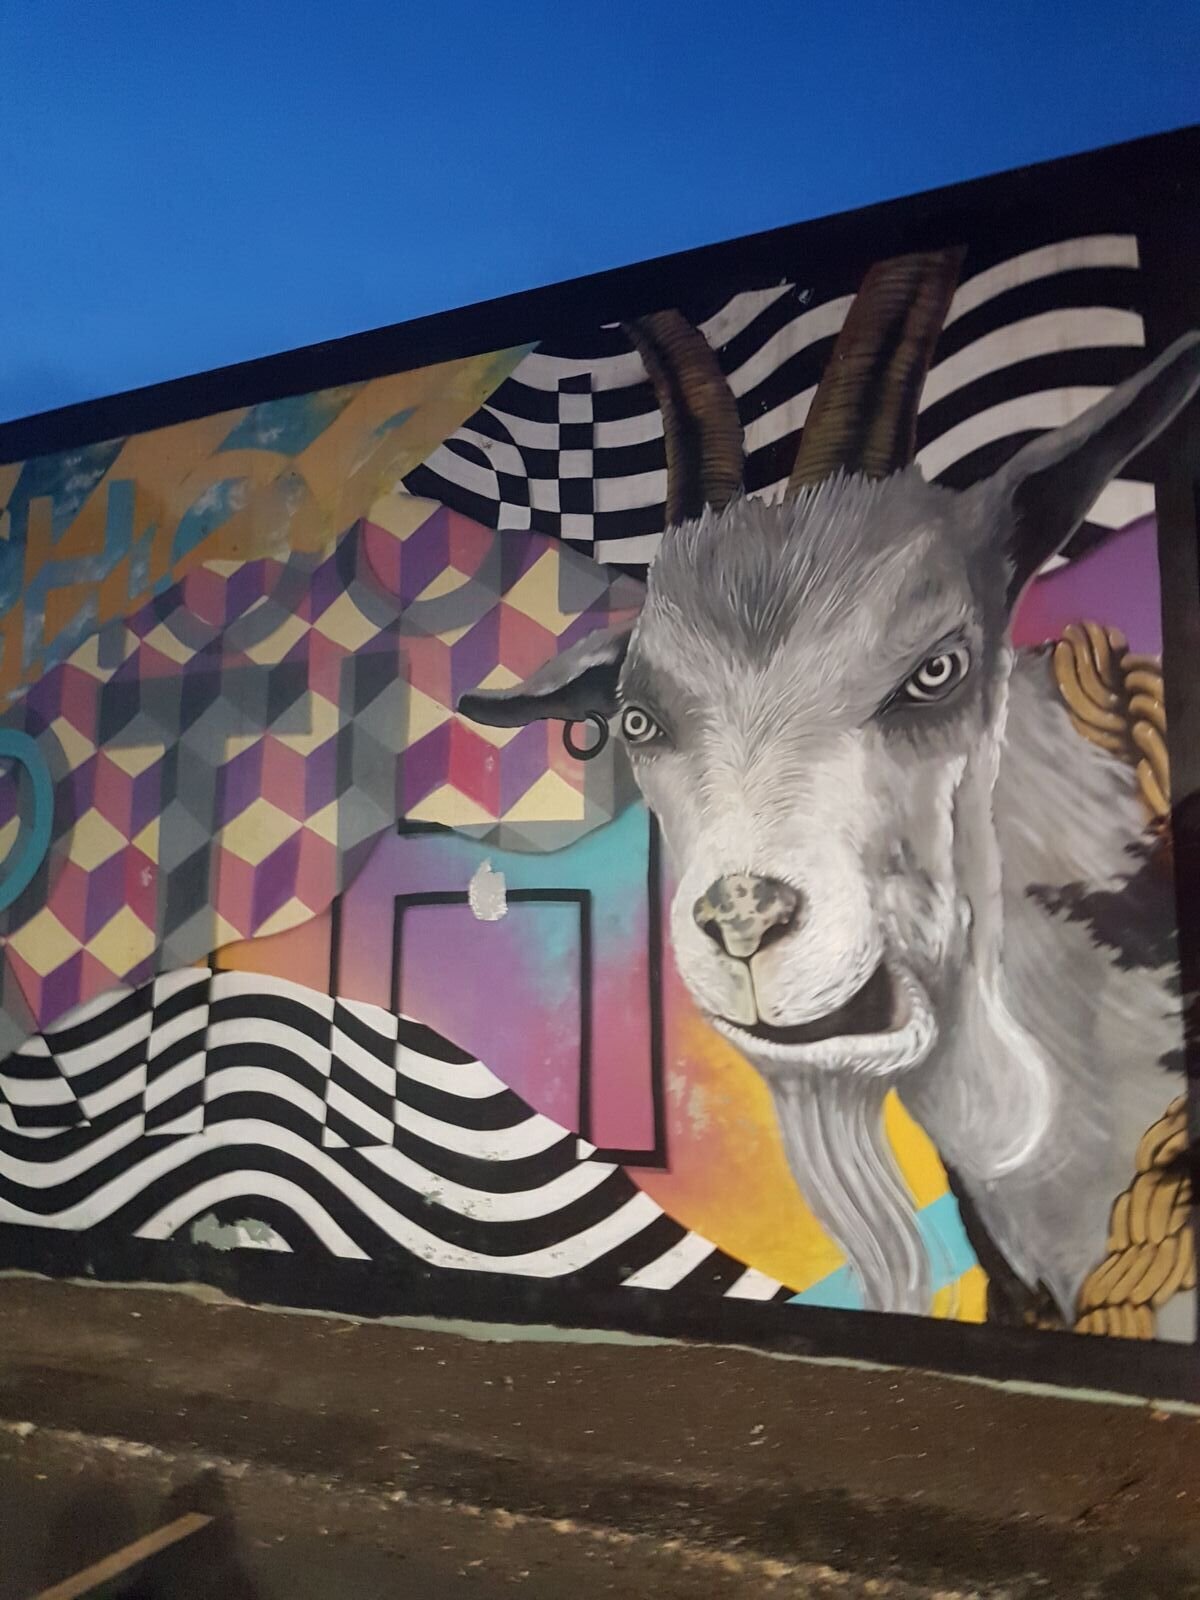 A large goat pained on the side of a building with many colors surrounding it. Portland street art